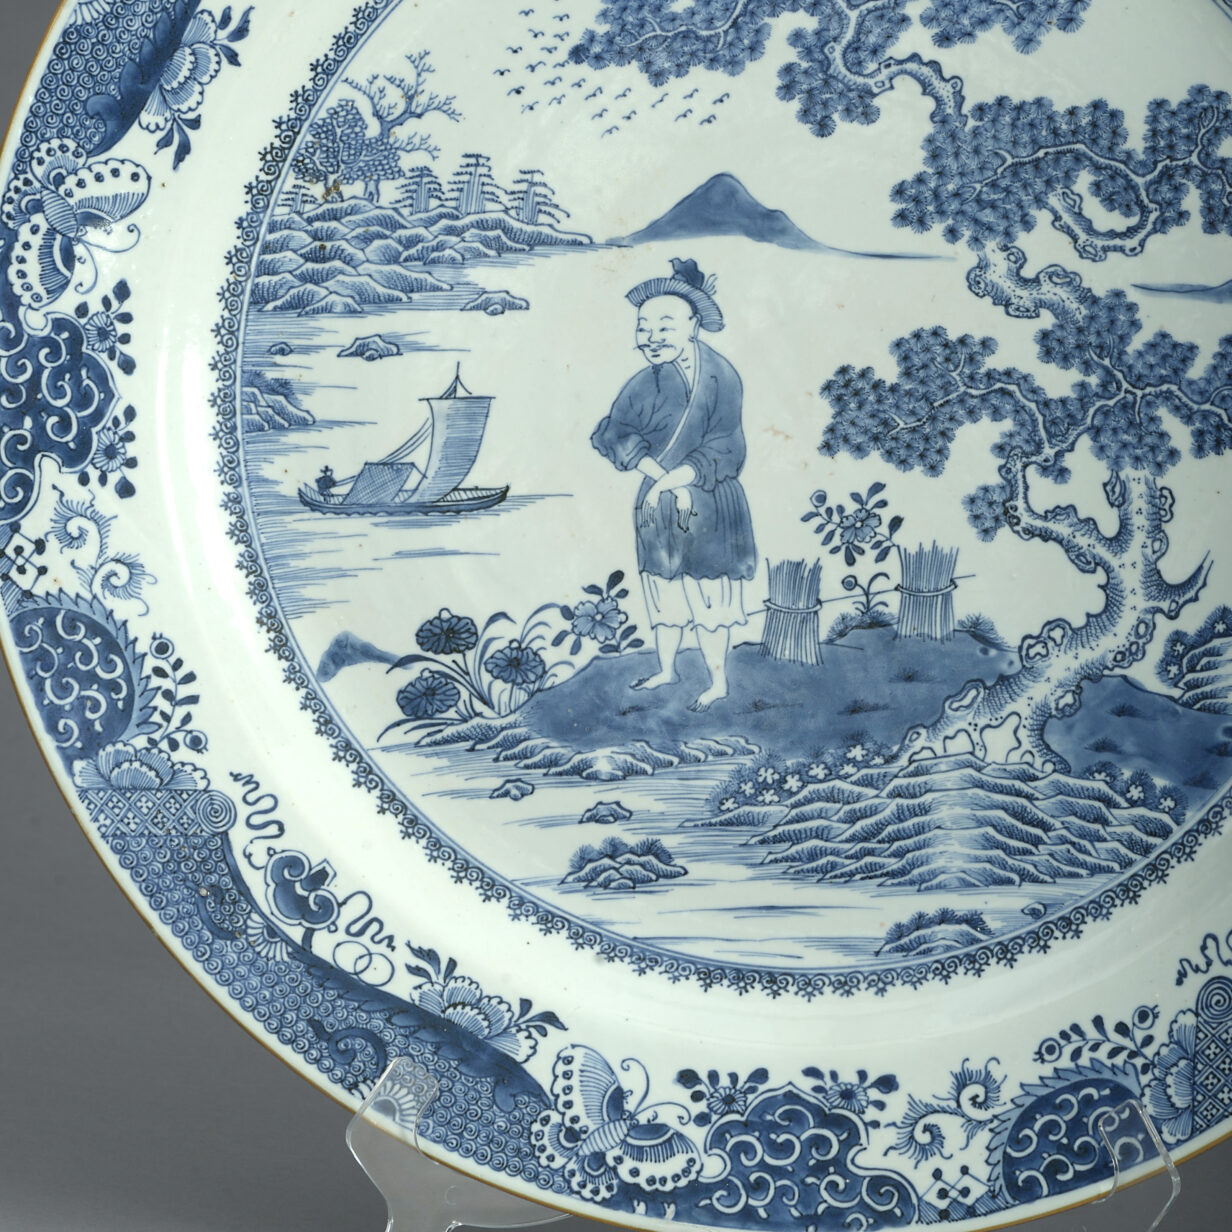 Large scale 18th century chinese export blue & white porcelain charger